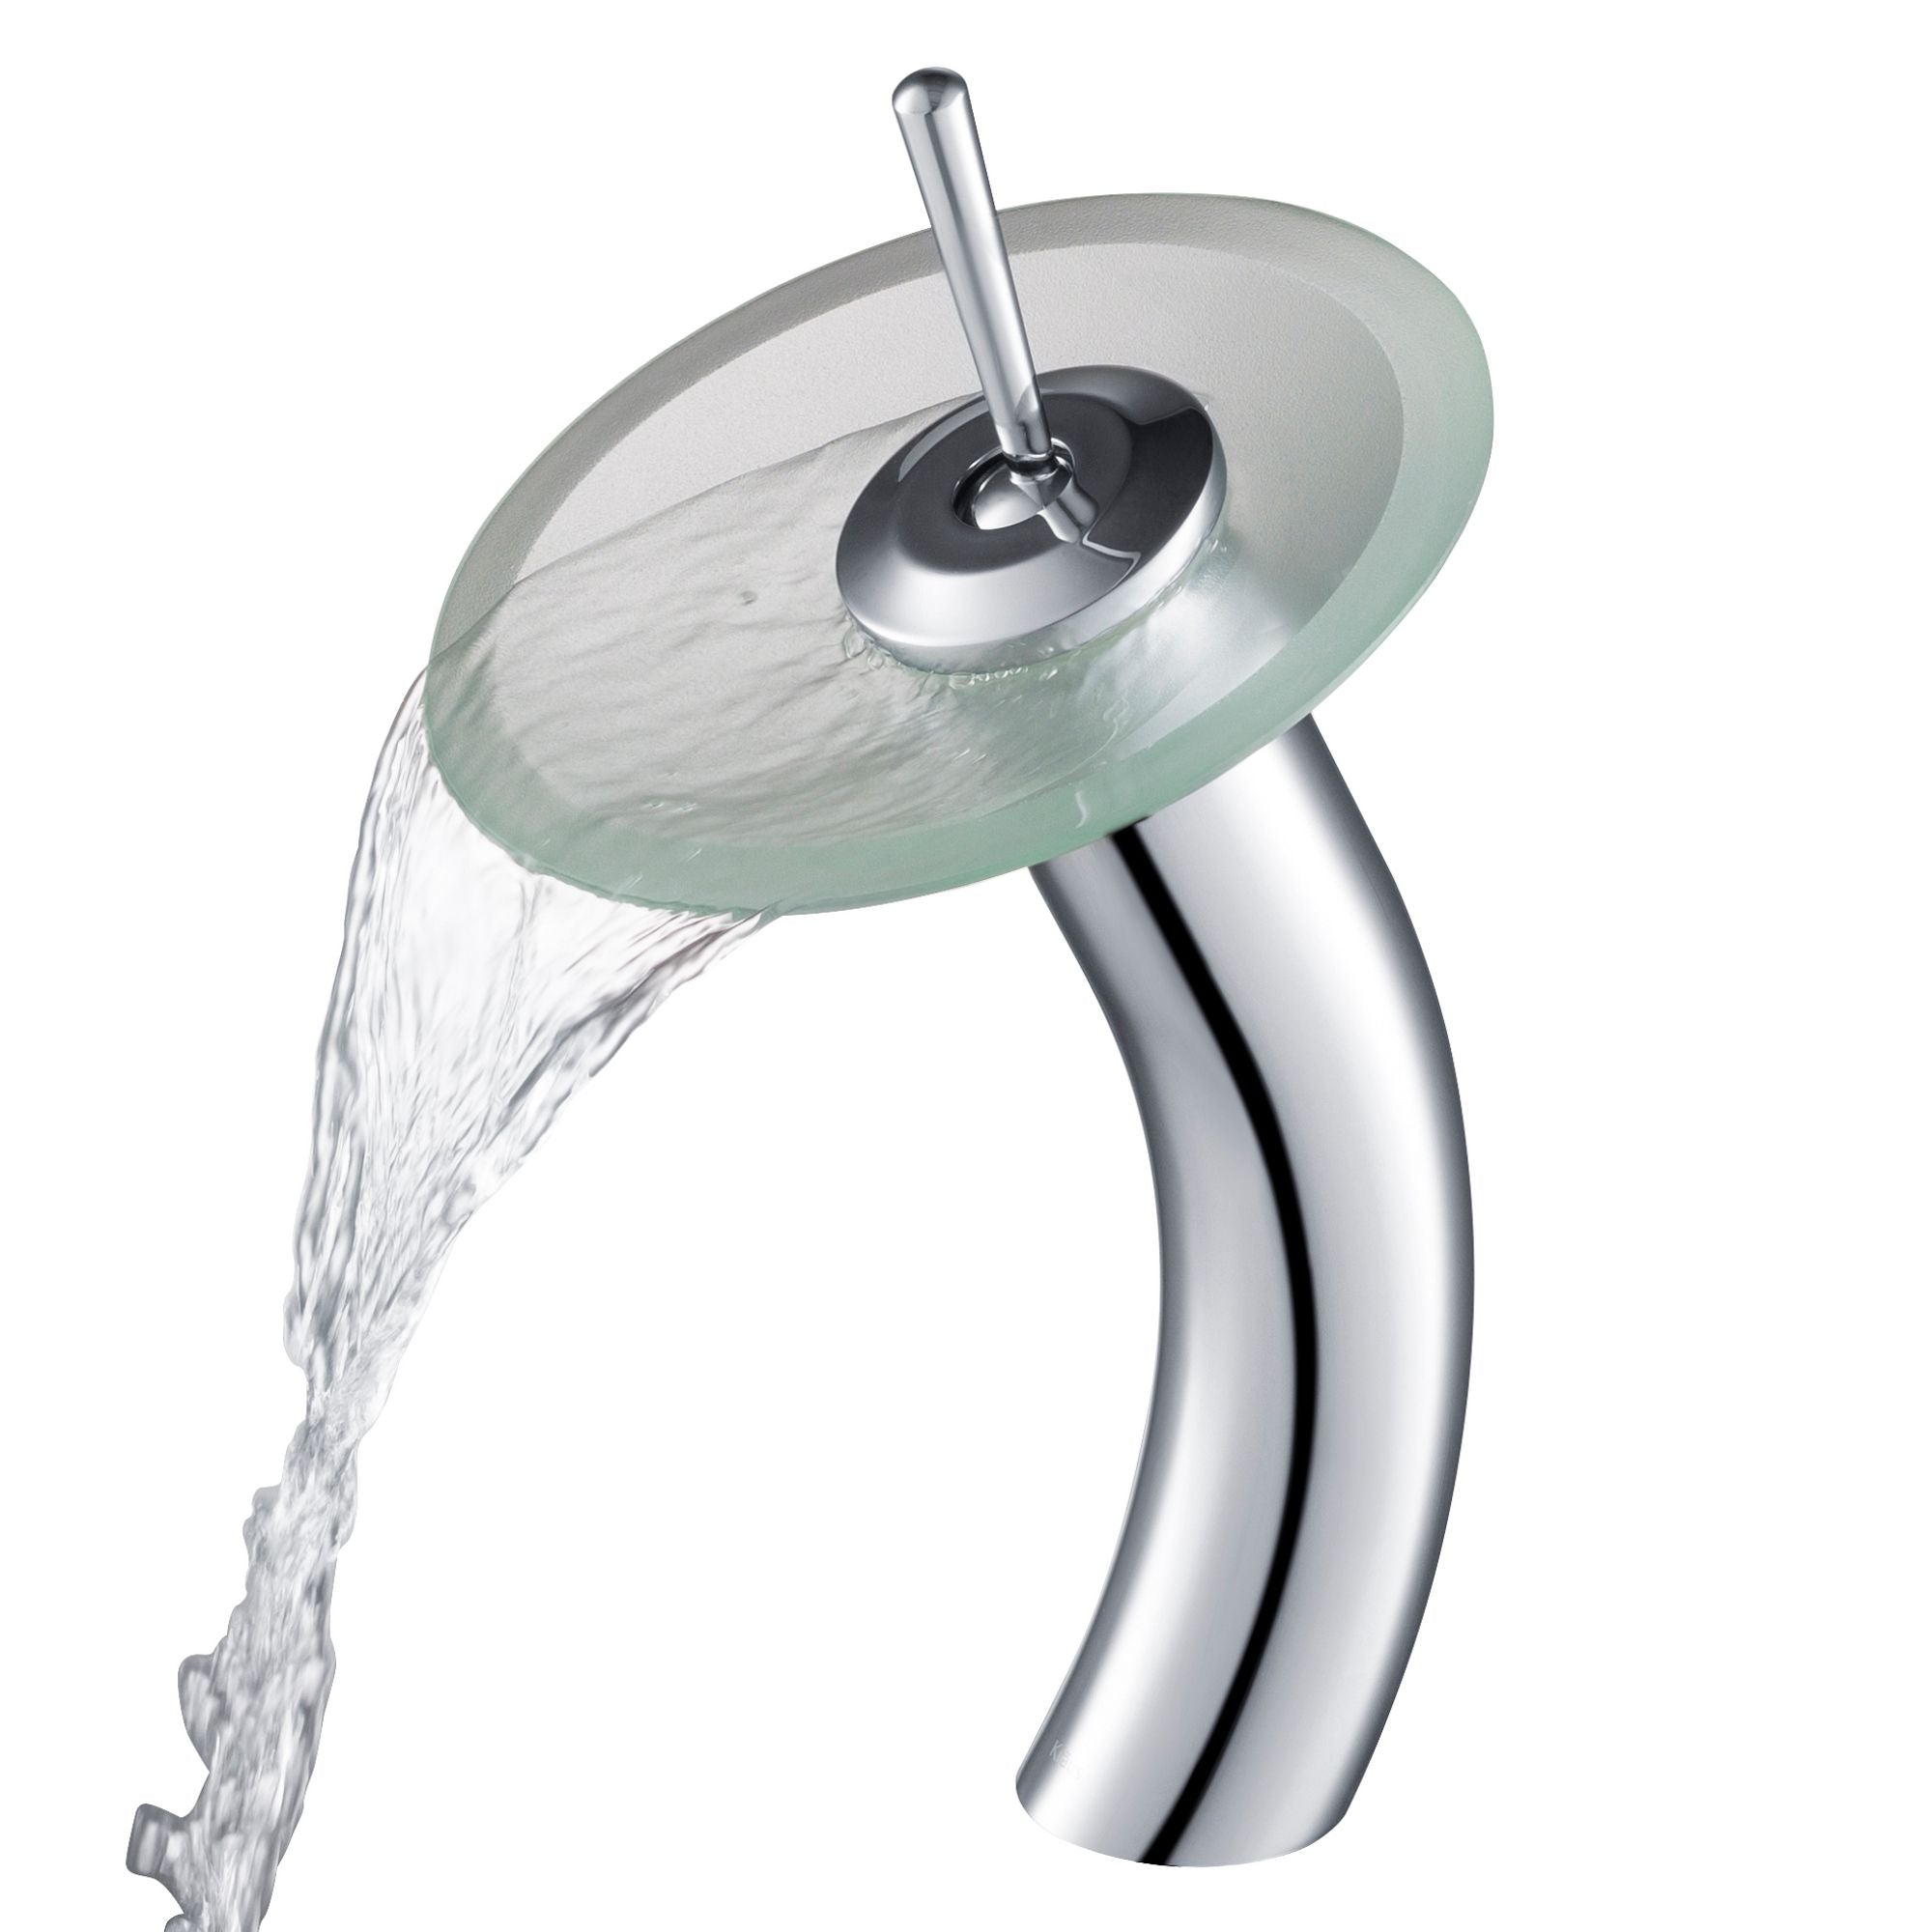 KRAUS Single Lever Waterfall Vessel Faucet with Glass Disk in Chrome and Frosted KGW-1700CH-FR | DirectSinks